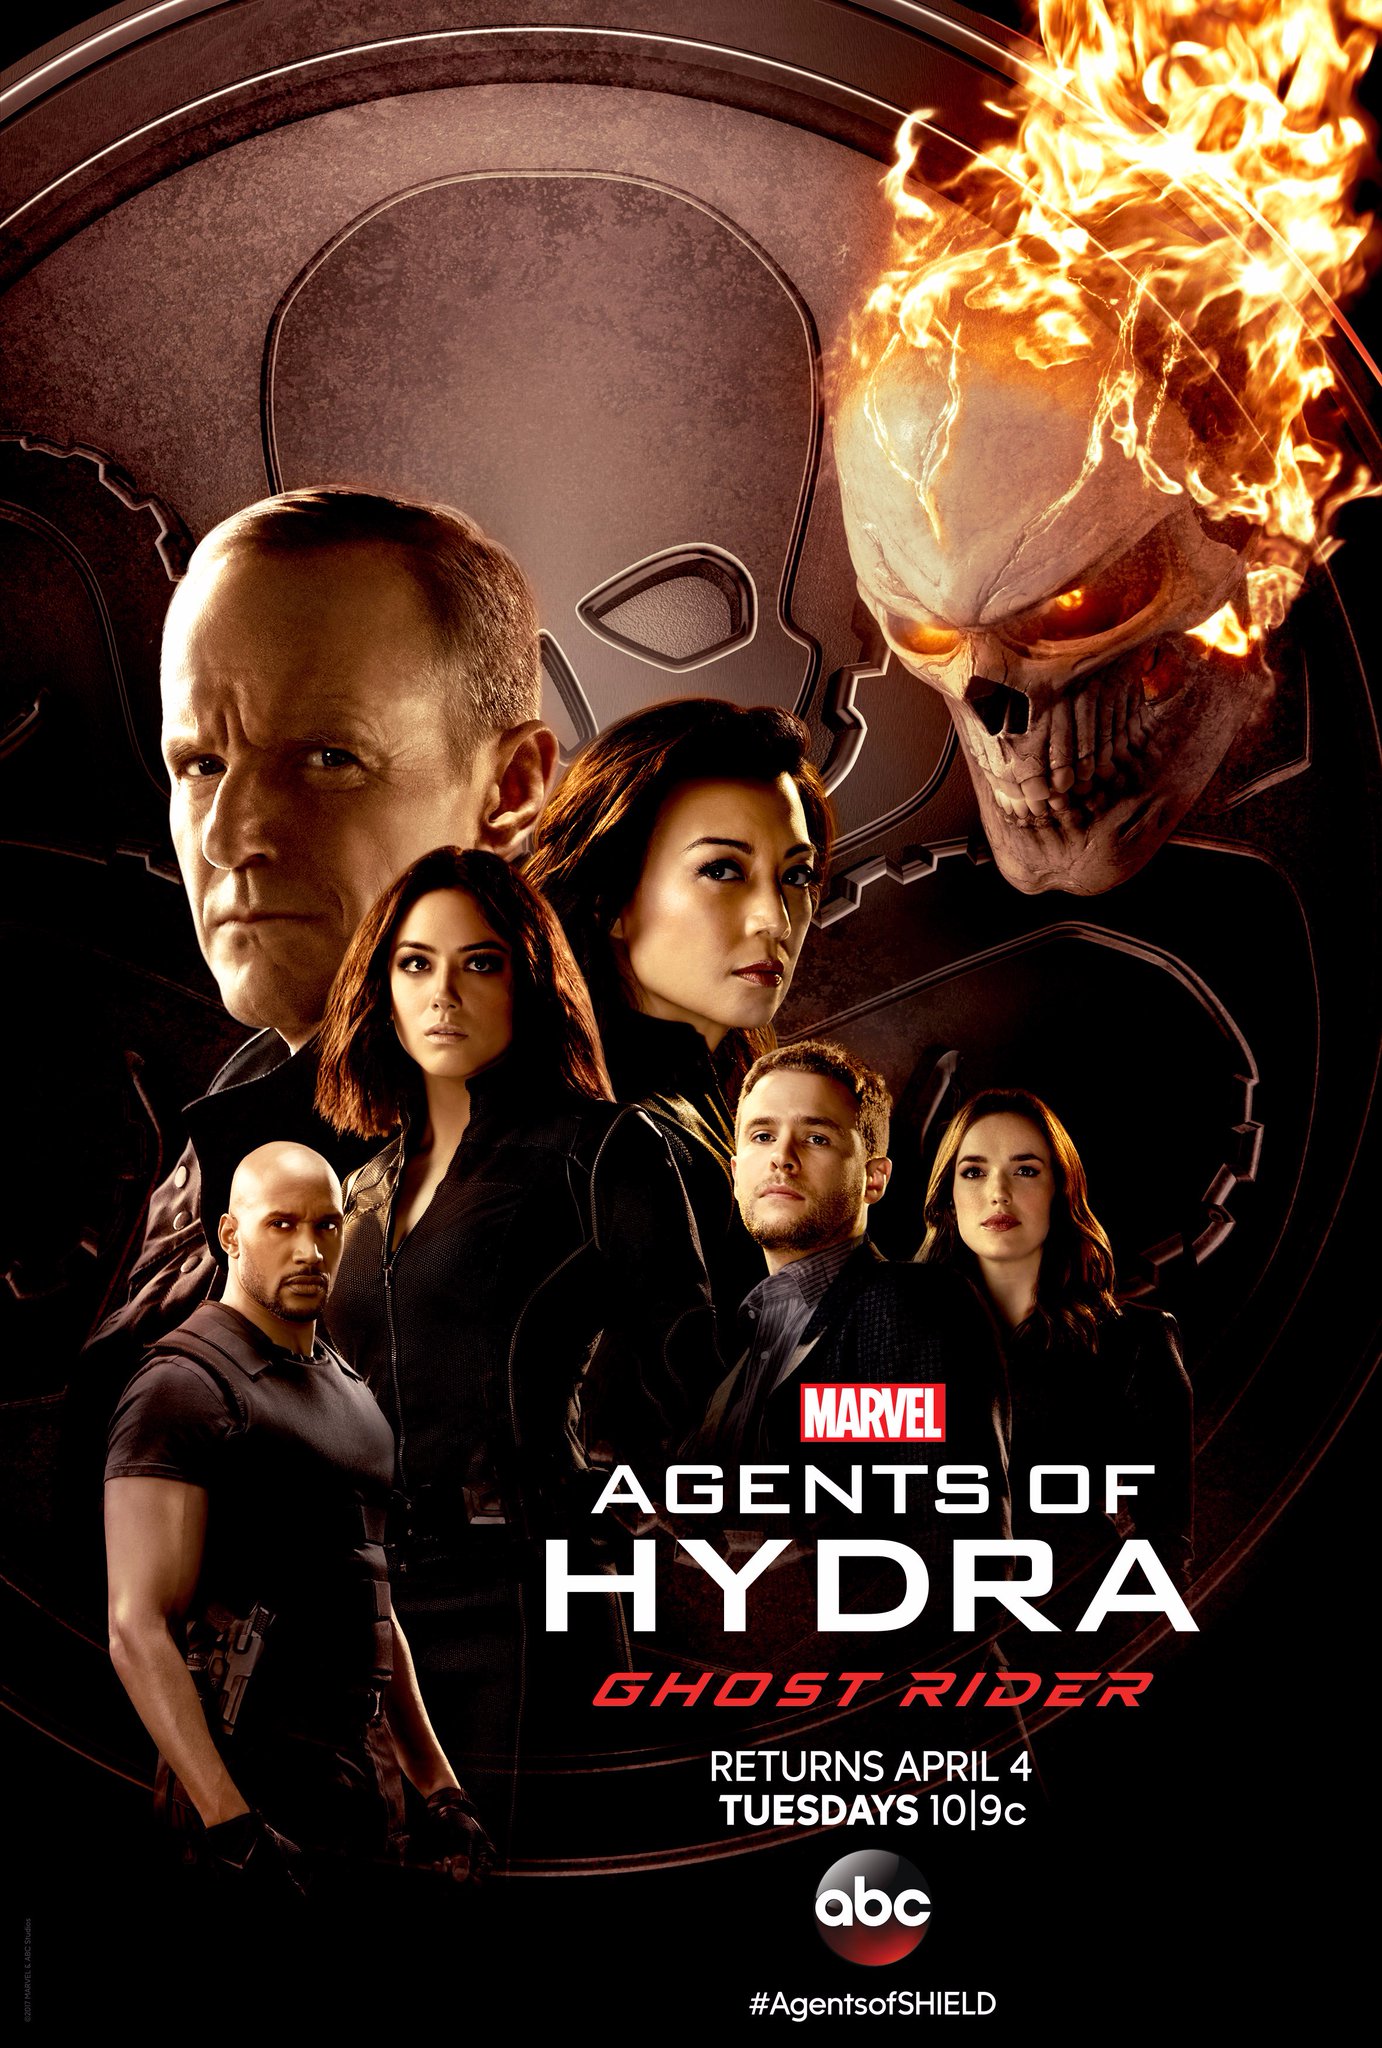 agents hydra 4 Agents of SHIELD Posters Tease Agents of HYDRA